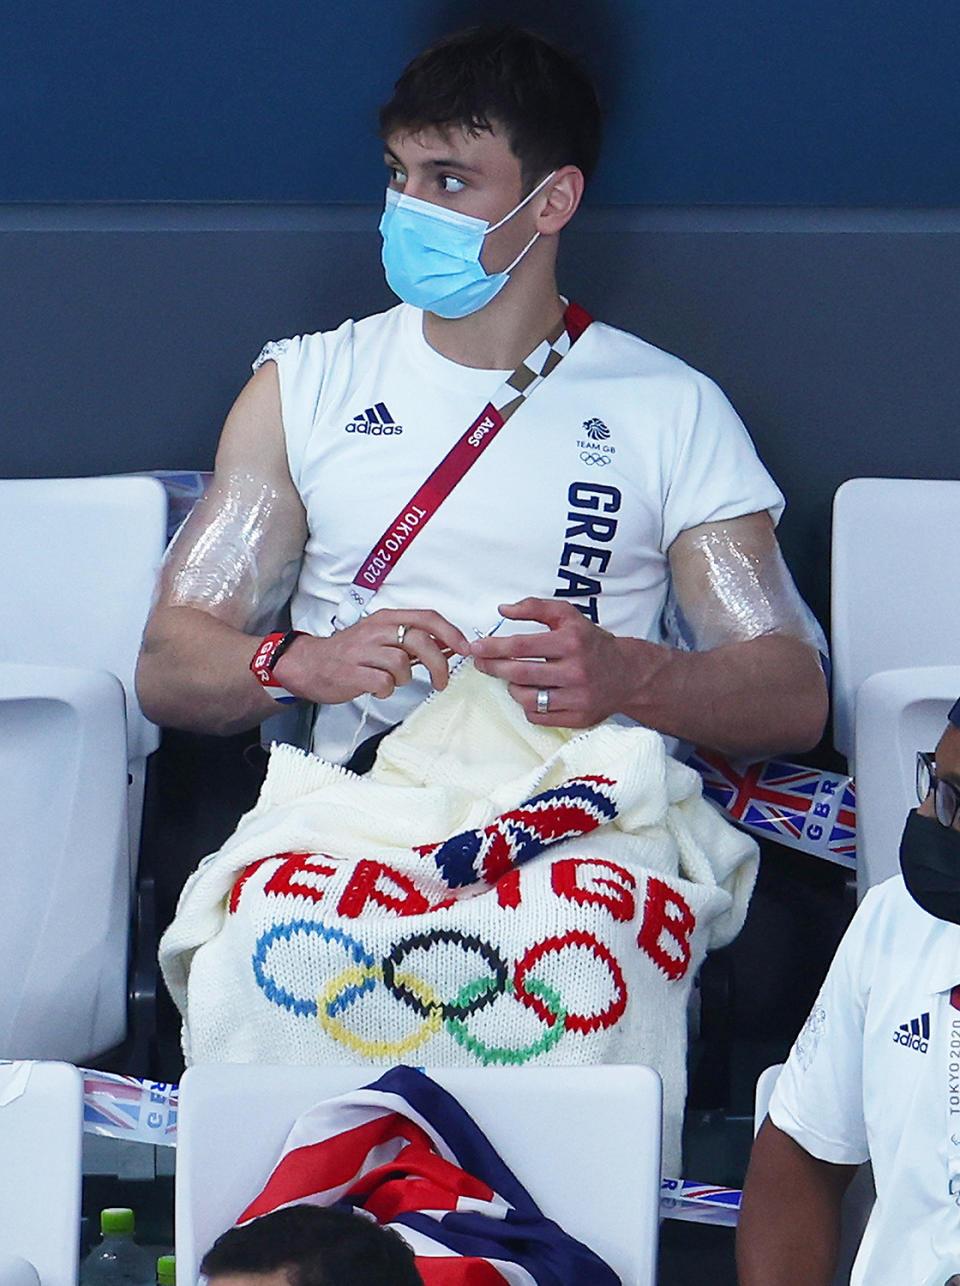 Photos of Tom Daley Knitting During the Olympics